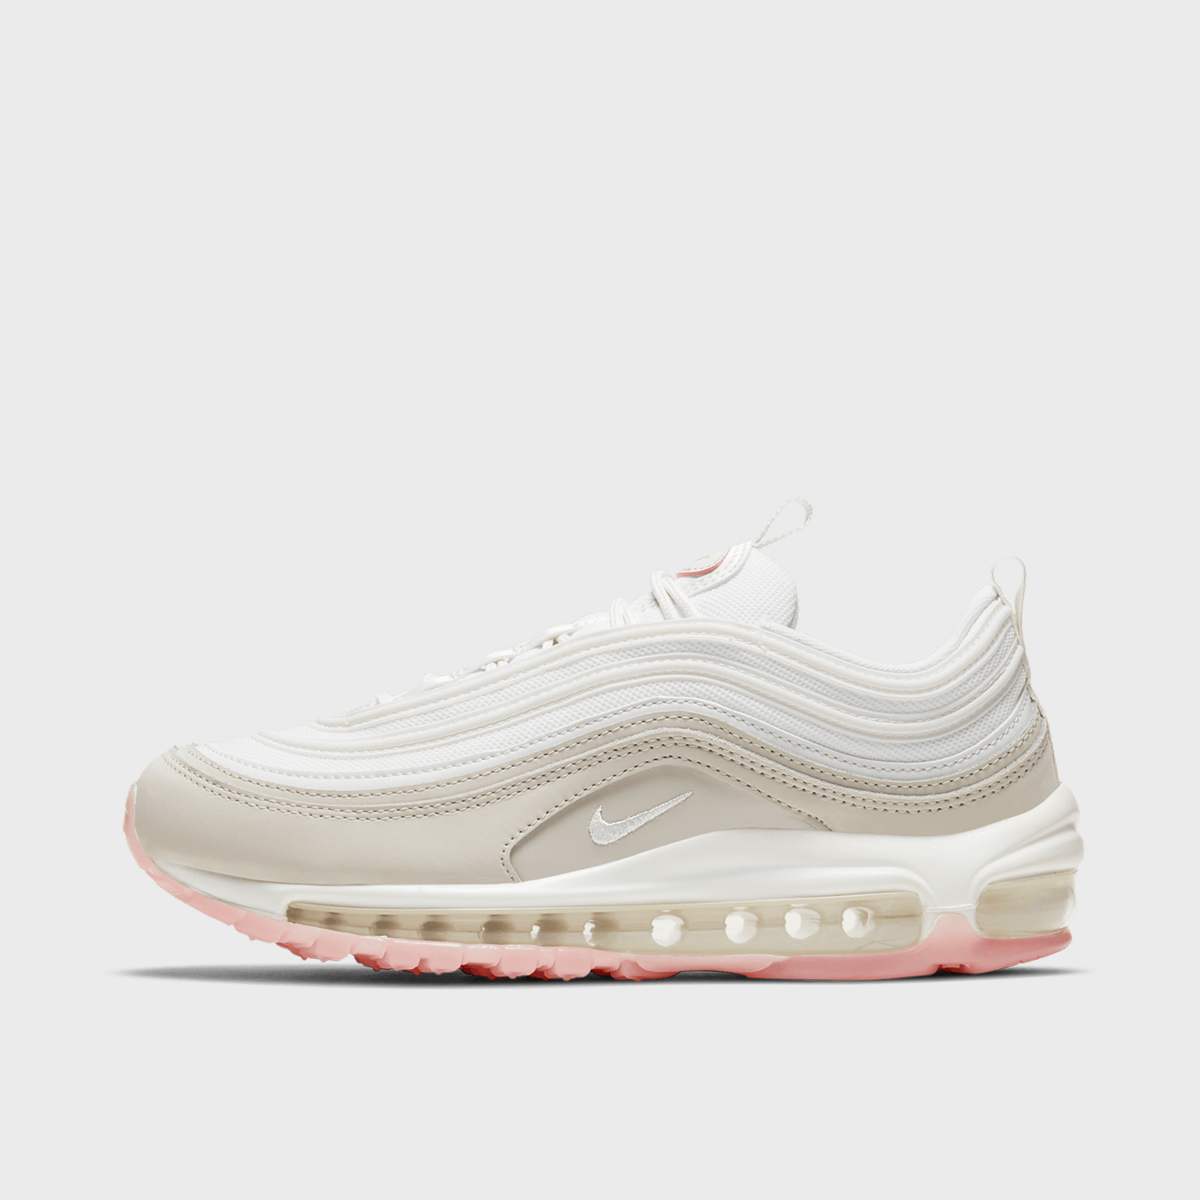 Productafbeelding: WMNS Air Max 97